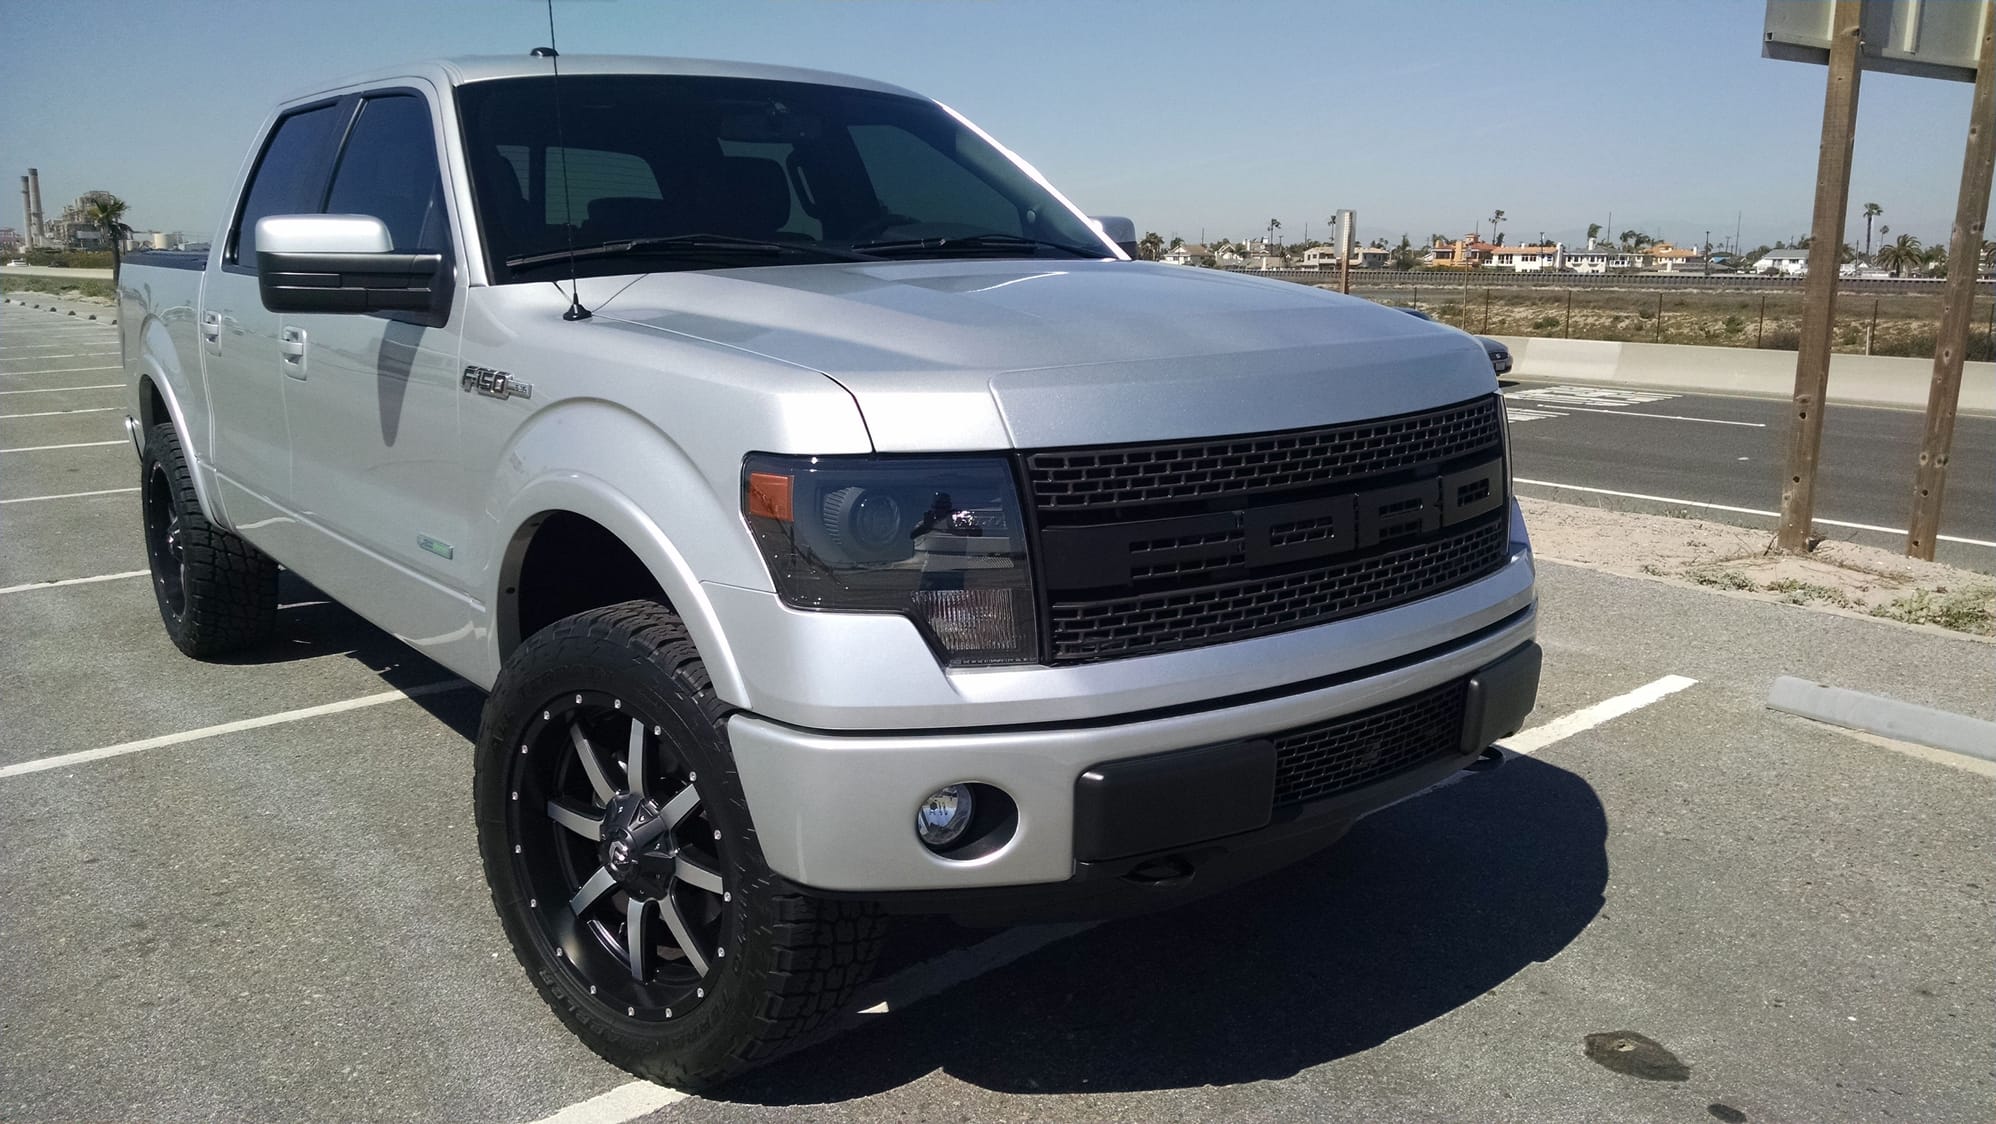 Raptor Style Grille Kit for NORMAL F150 UPDATE - Page 77 - Ford F150